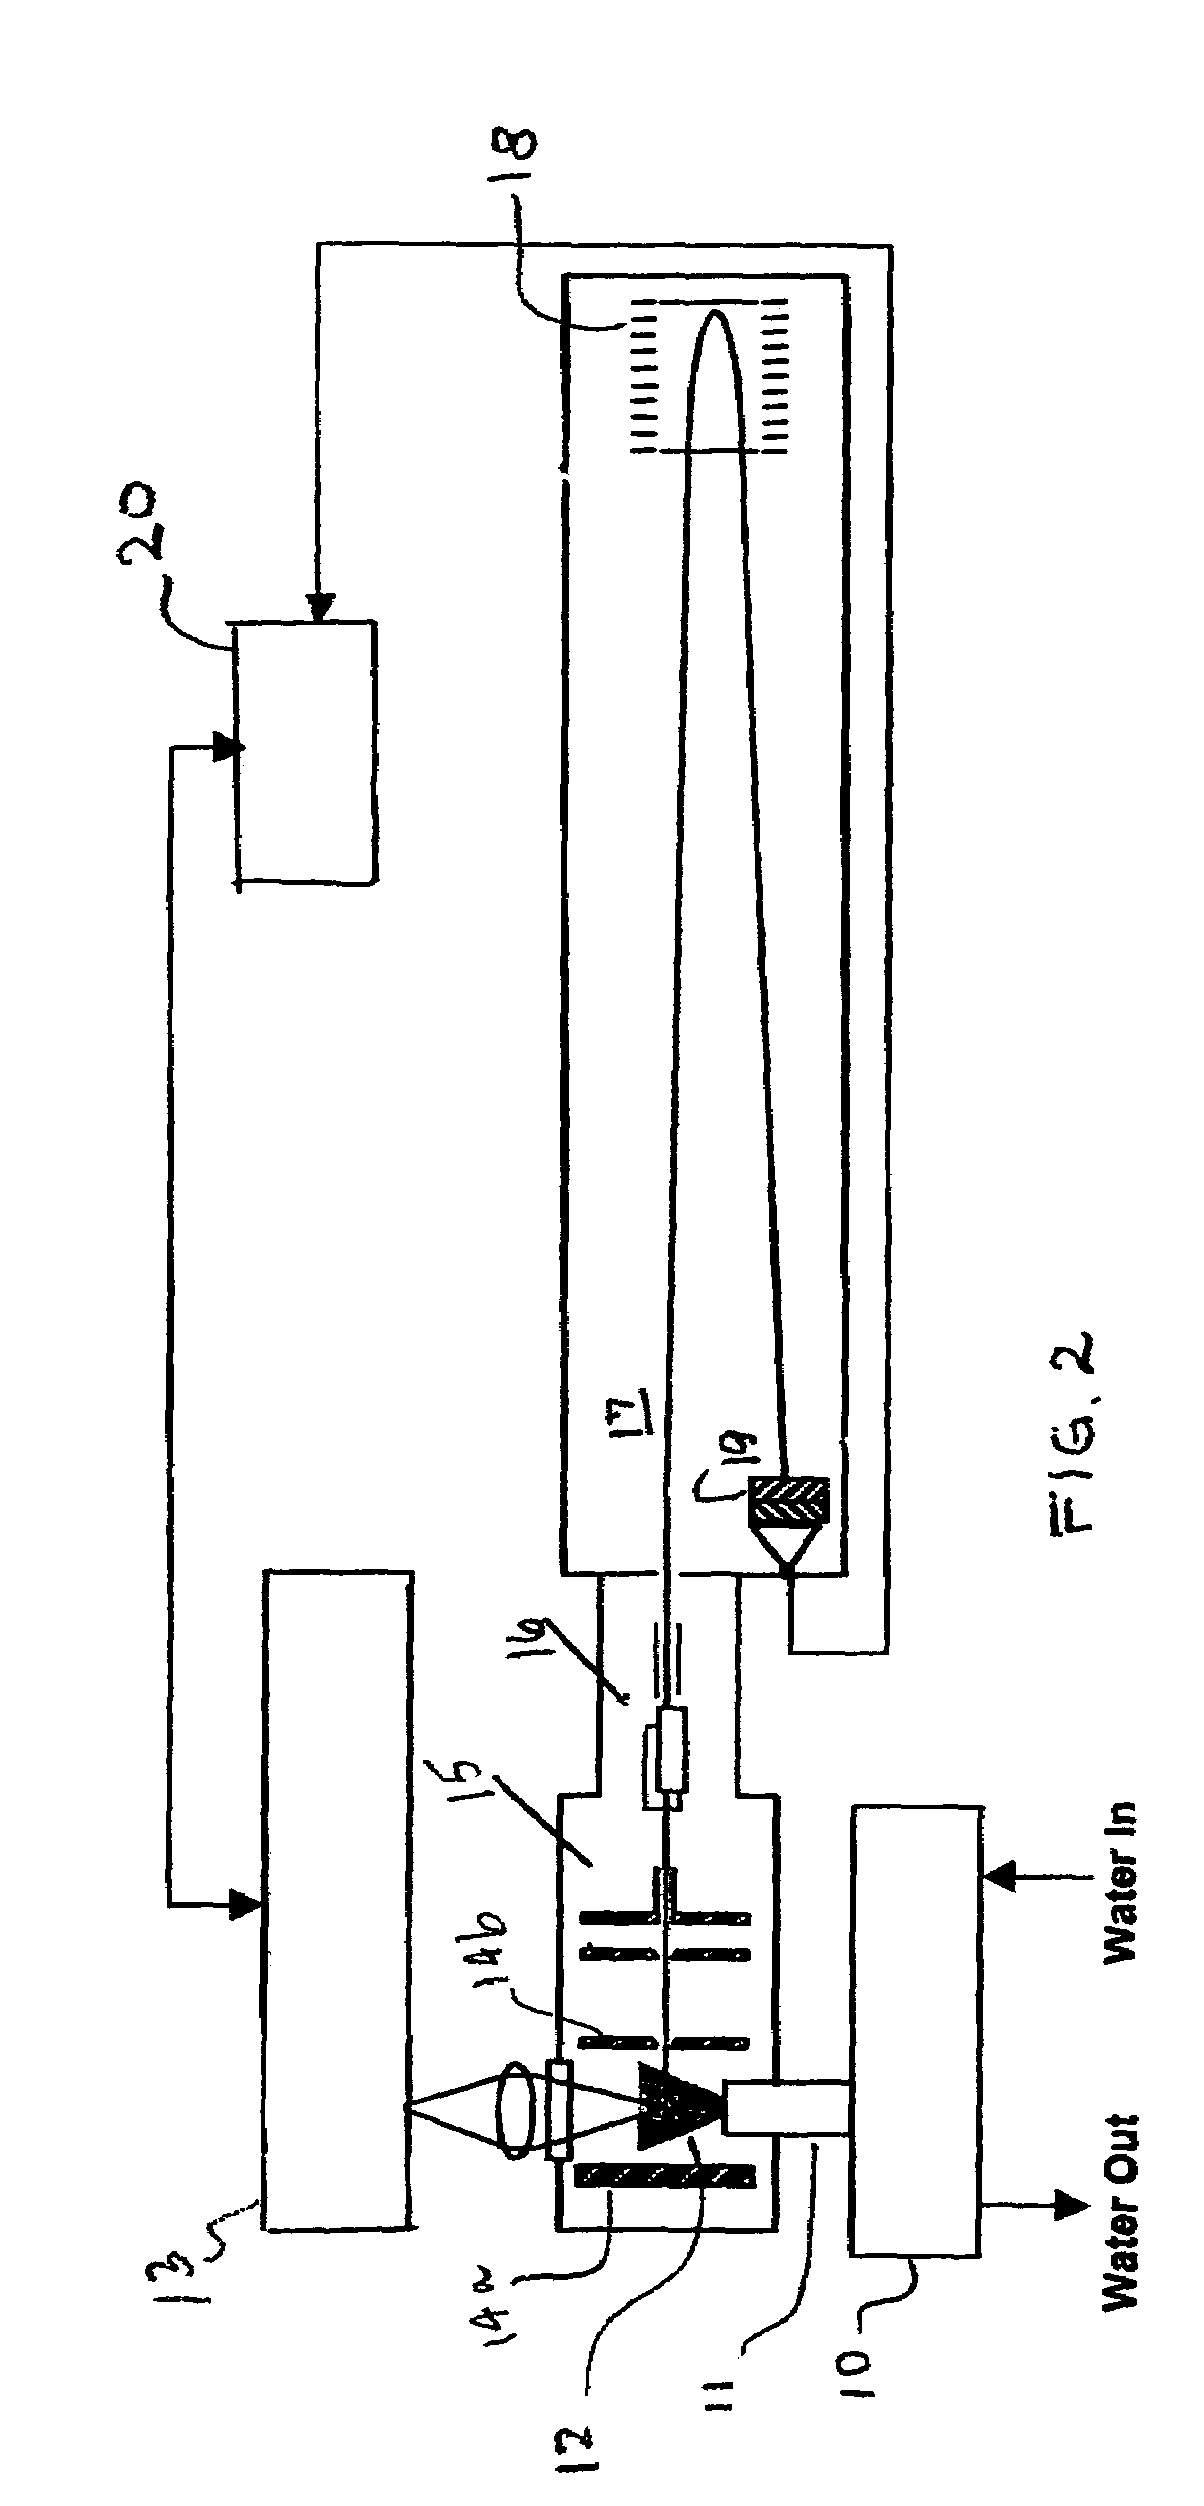 Method and apparatus for the detection and identification of trace organic substances from a continuous flow sample system using laser photoionization-mass spectrometry